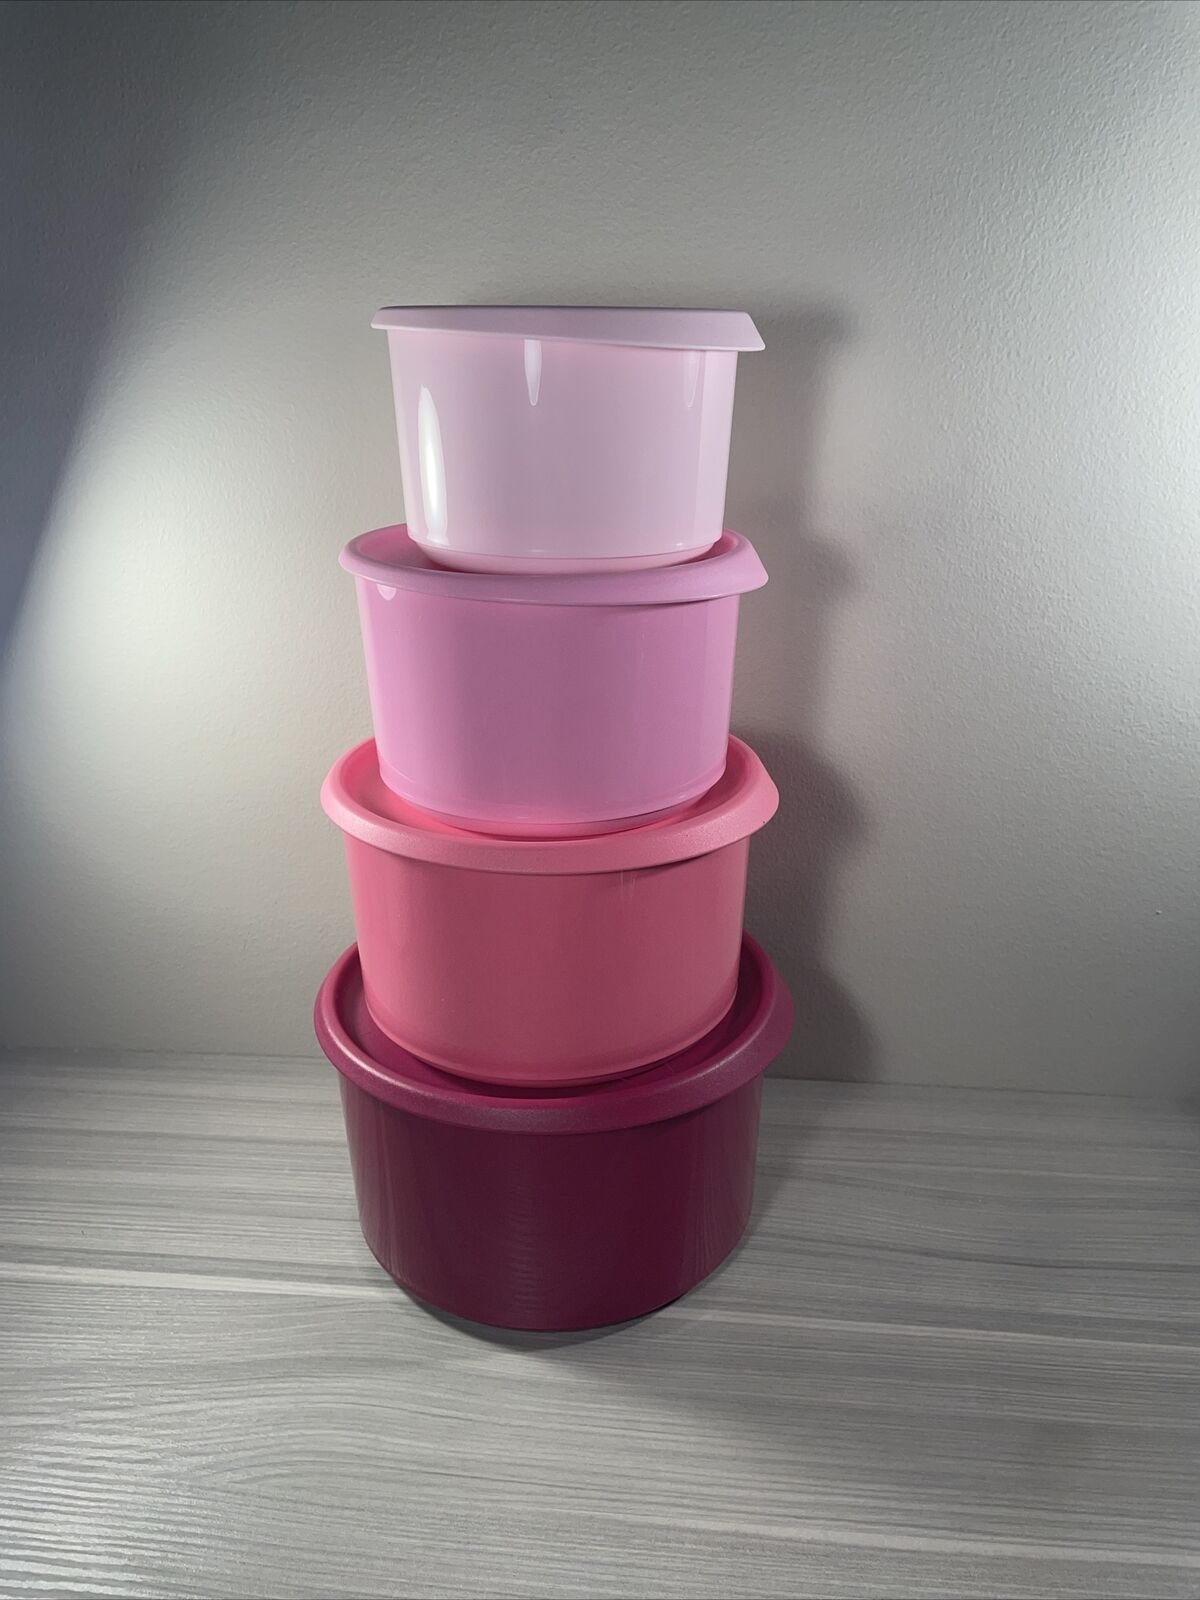 New Tupperware One-touch Seals Canisters w/ Lids, Set of 4 Shades of Pink